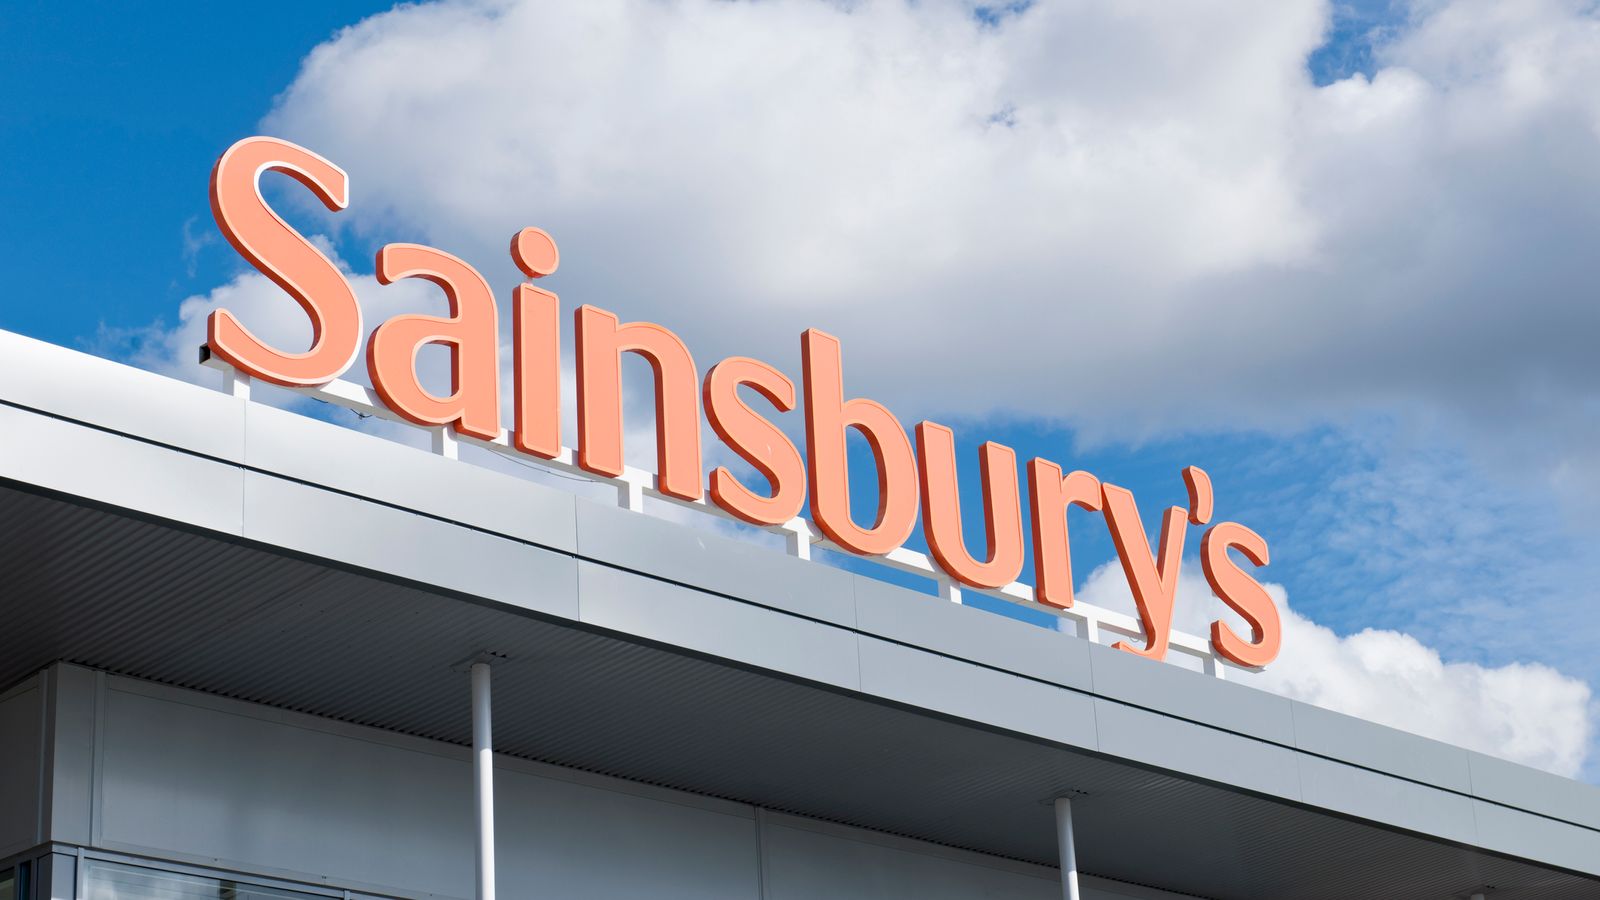 Sainsbury's sales fall as boss warns of 'intensifying pressure on household budgets'